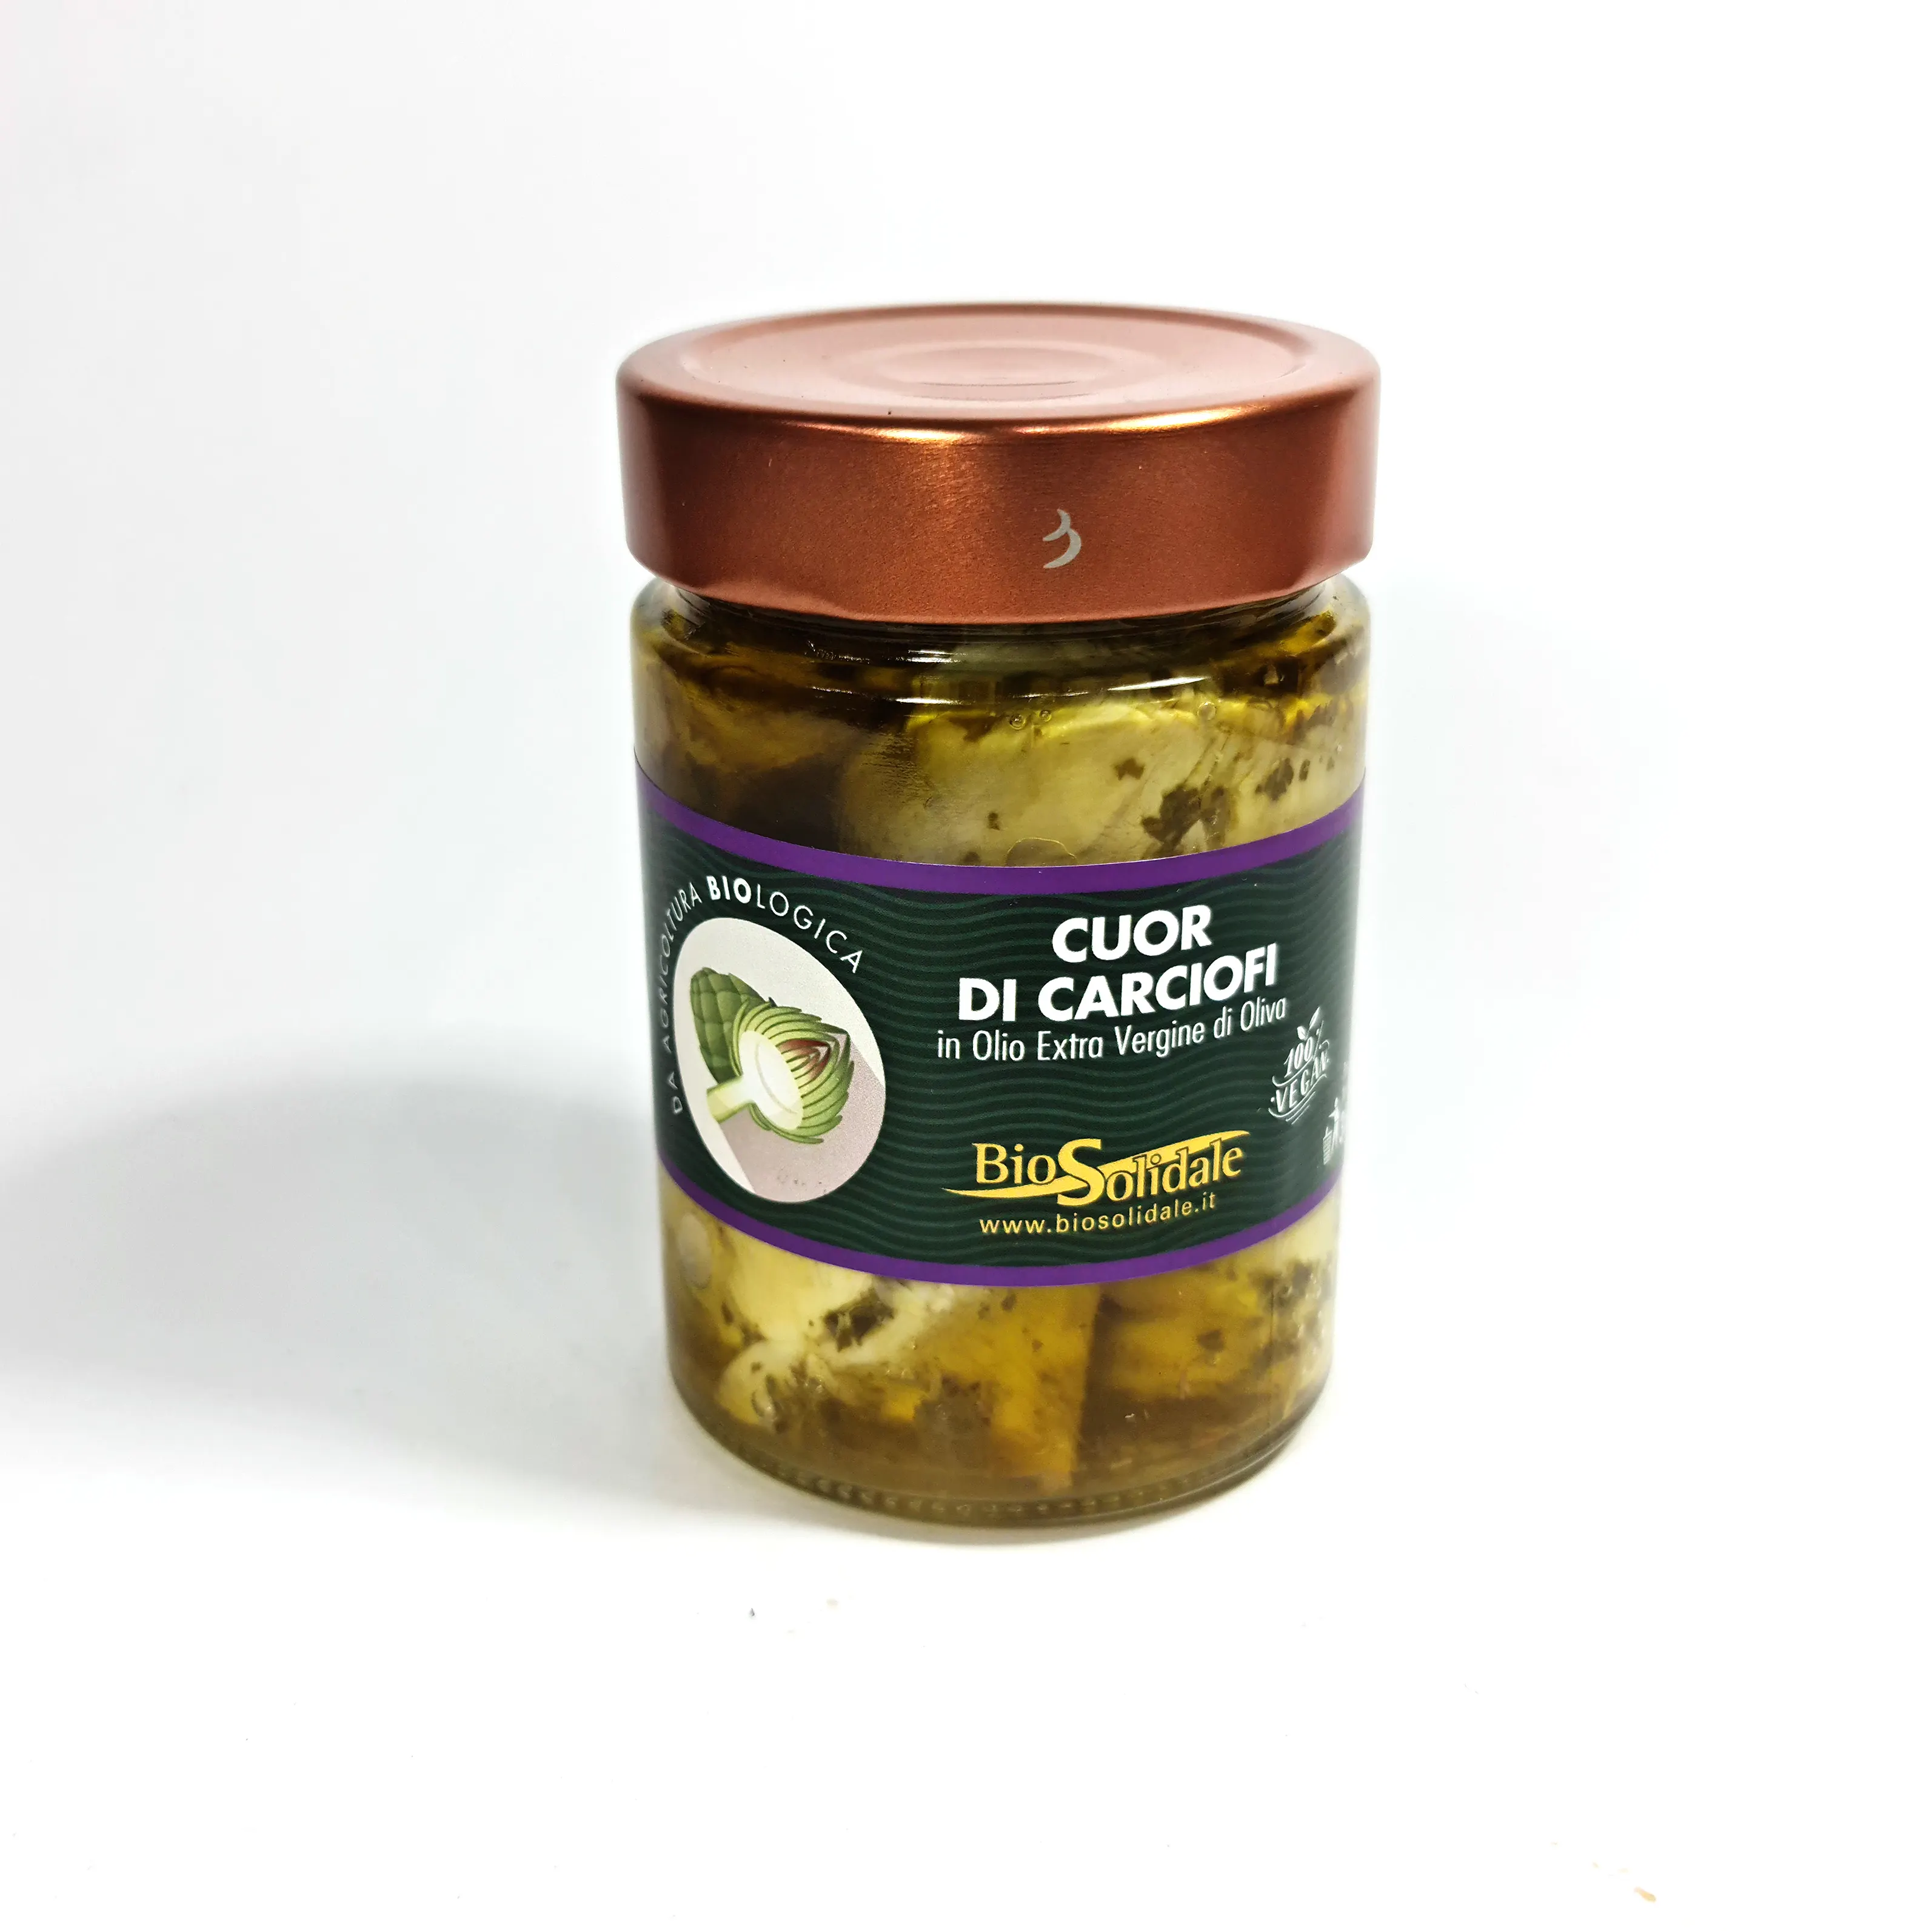 MADE IN ITALY ORGANIC ARTICHOKES HEARTS IN EXTRA VIRGIN OLIVE OIL 300 g FOR LUNCH OR HEALTH MEAL